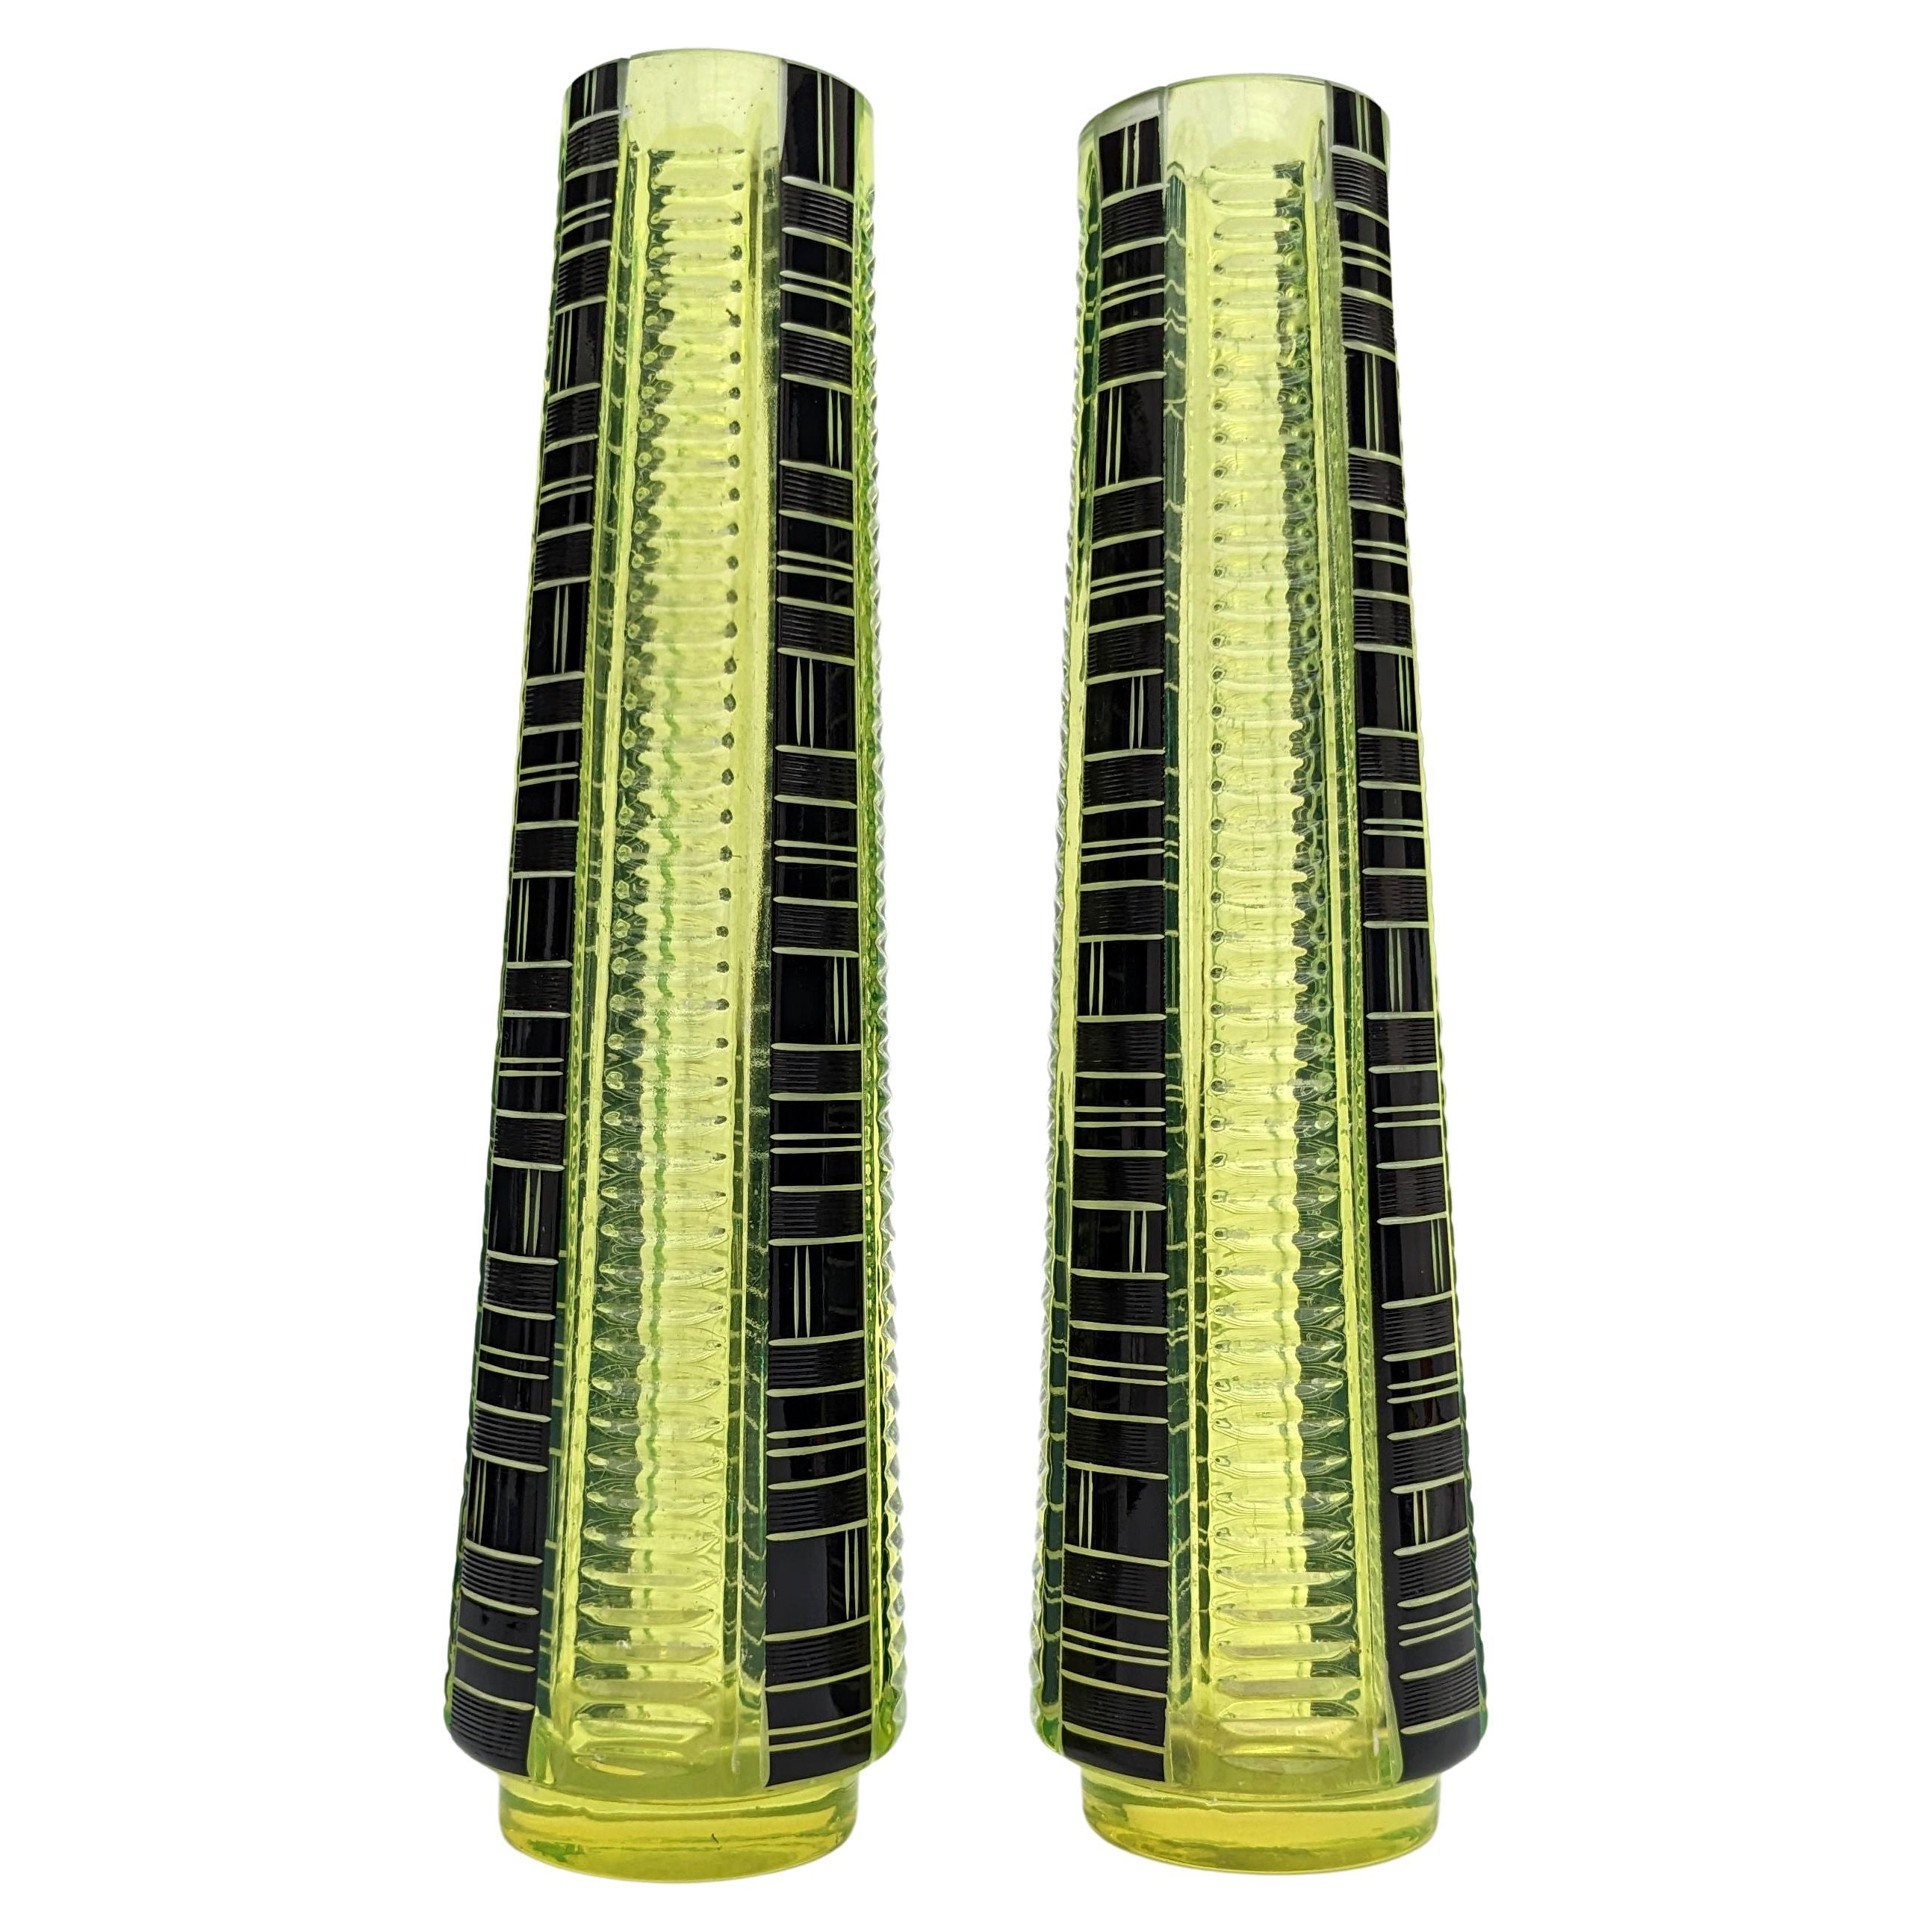 Art Deco Pair Of Tall Uranium Glass Vases By Karl Palda, c1930 For Sale